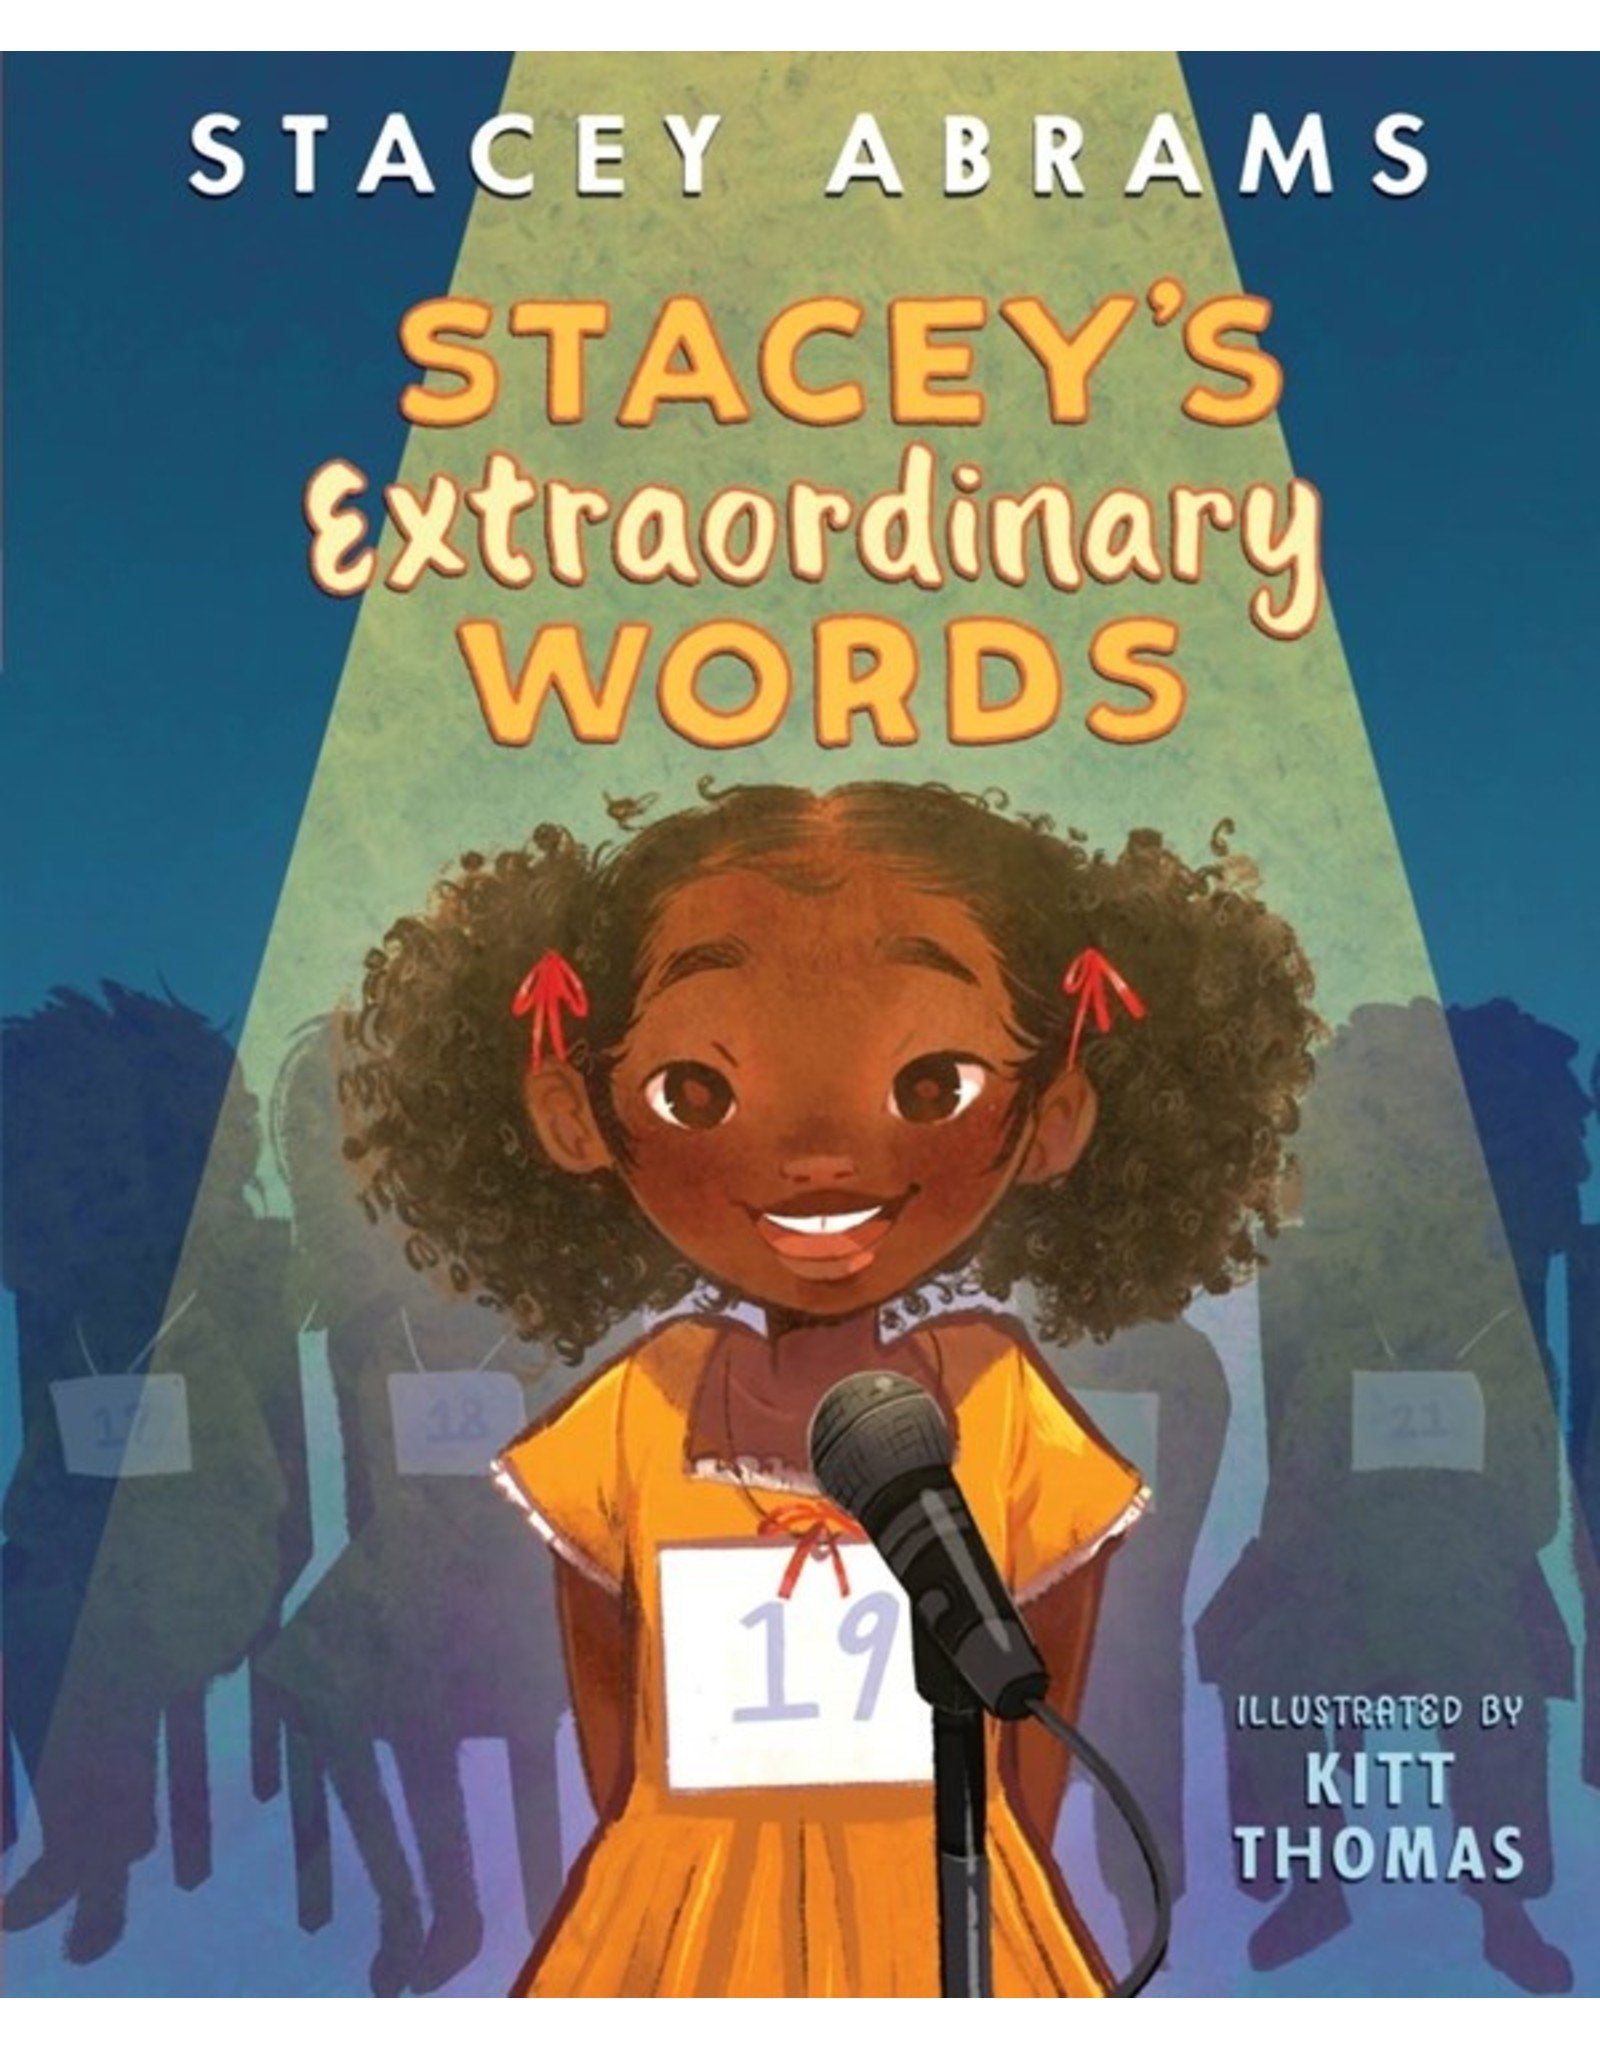 Books Stacey's Extraordinary Words by Stacey Abrams Illustrated  by Kitt Thomas